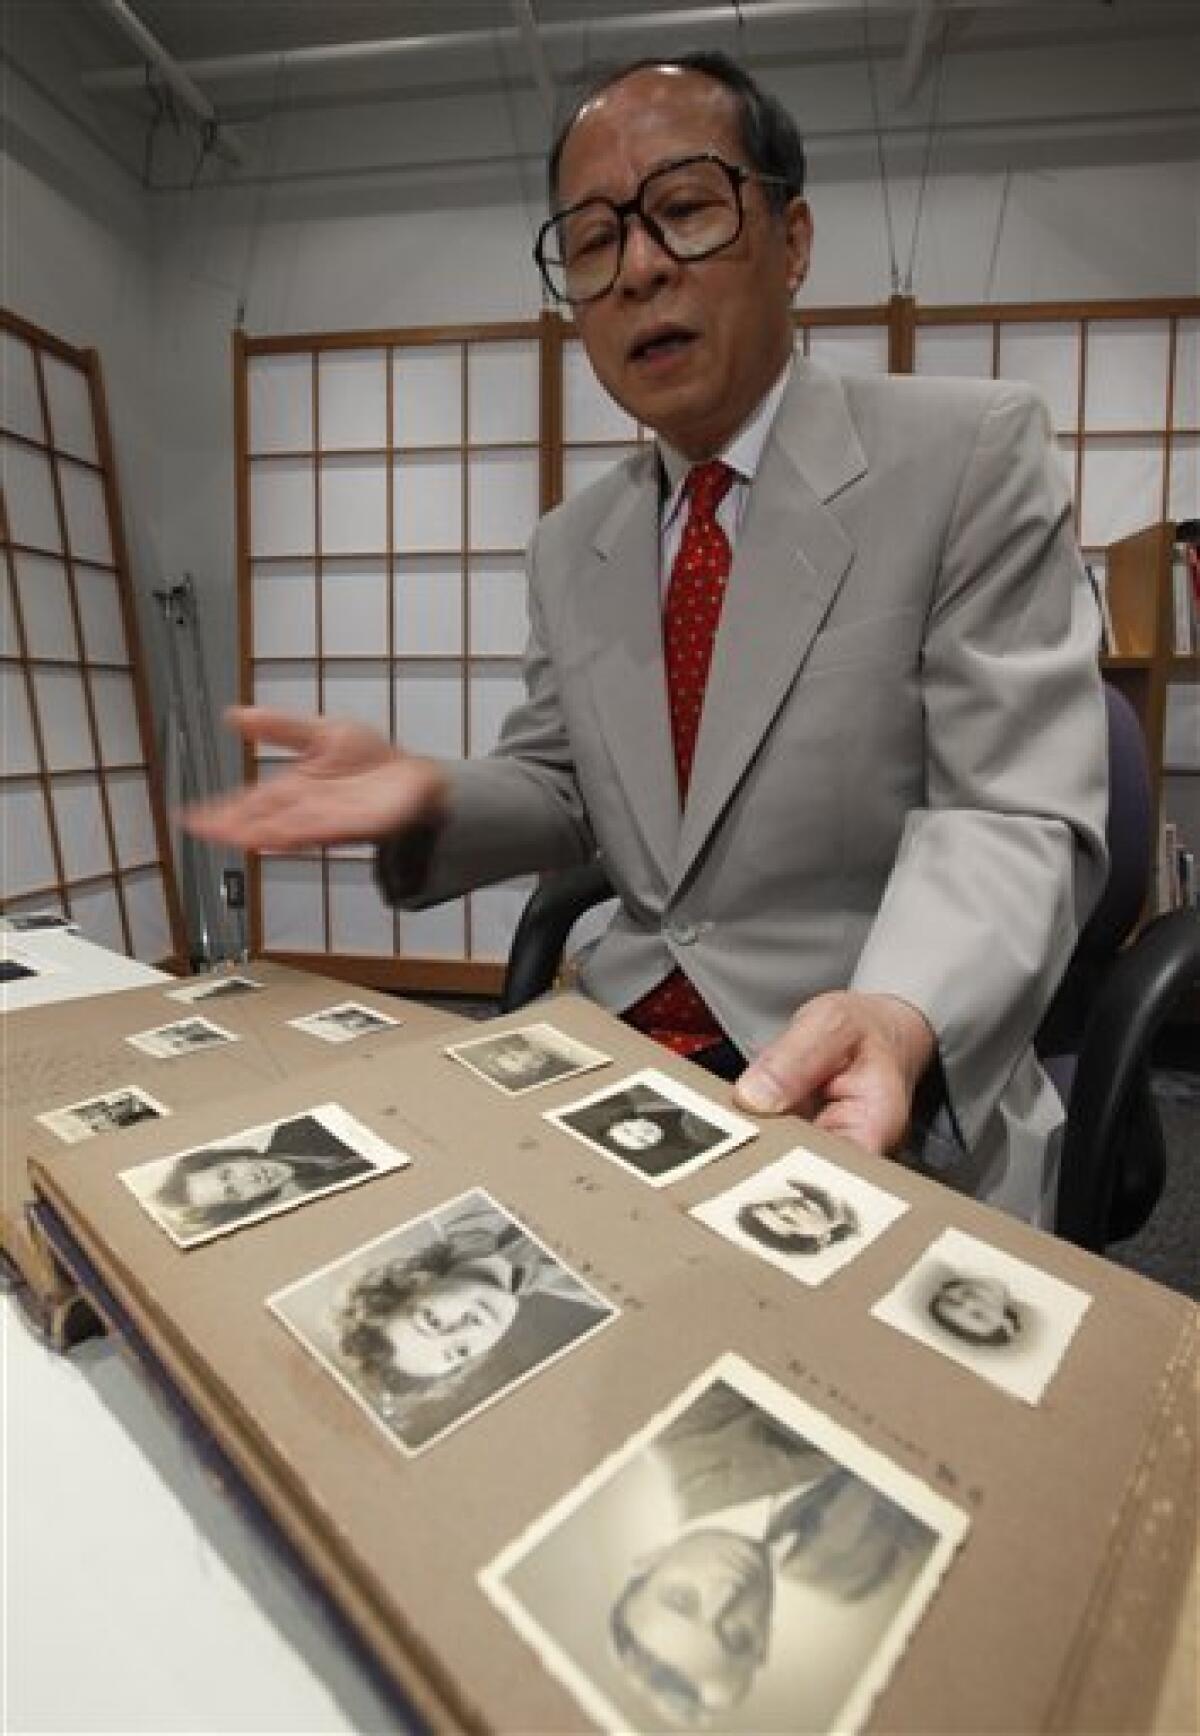 In this July 26, 2010, Akira Kitade photo, a diary owned by Japan Tourist Bureau employee Tatsuo Osako is displayed during an interview in Tokyo. The page in the foreground holds seven photos given to Osako by people whom Osako helped escape from Europe in the early days of World War II. The photographs are part of a recently discovered group of prints which throws more light on a subplot of the Holocaust: the small army of Japanese bureaucrats who helped shepherd thousands of Jews to safety. (AP Photo/Shizuo Kambayashi)